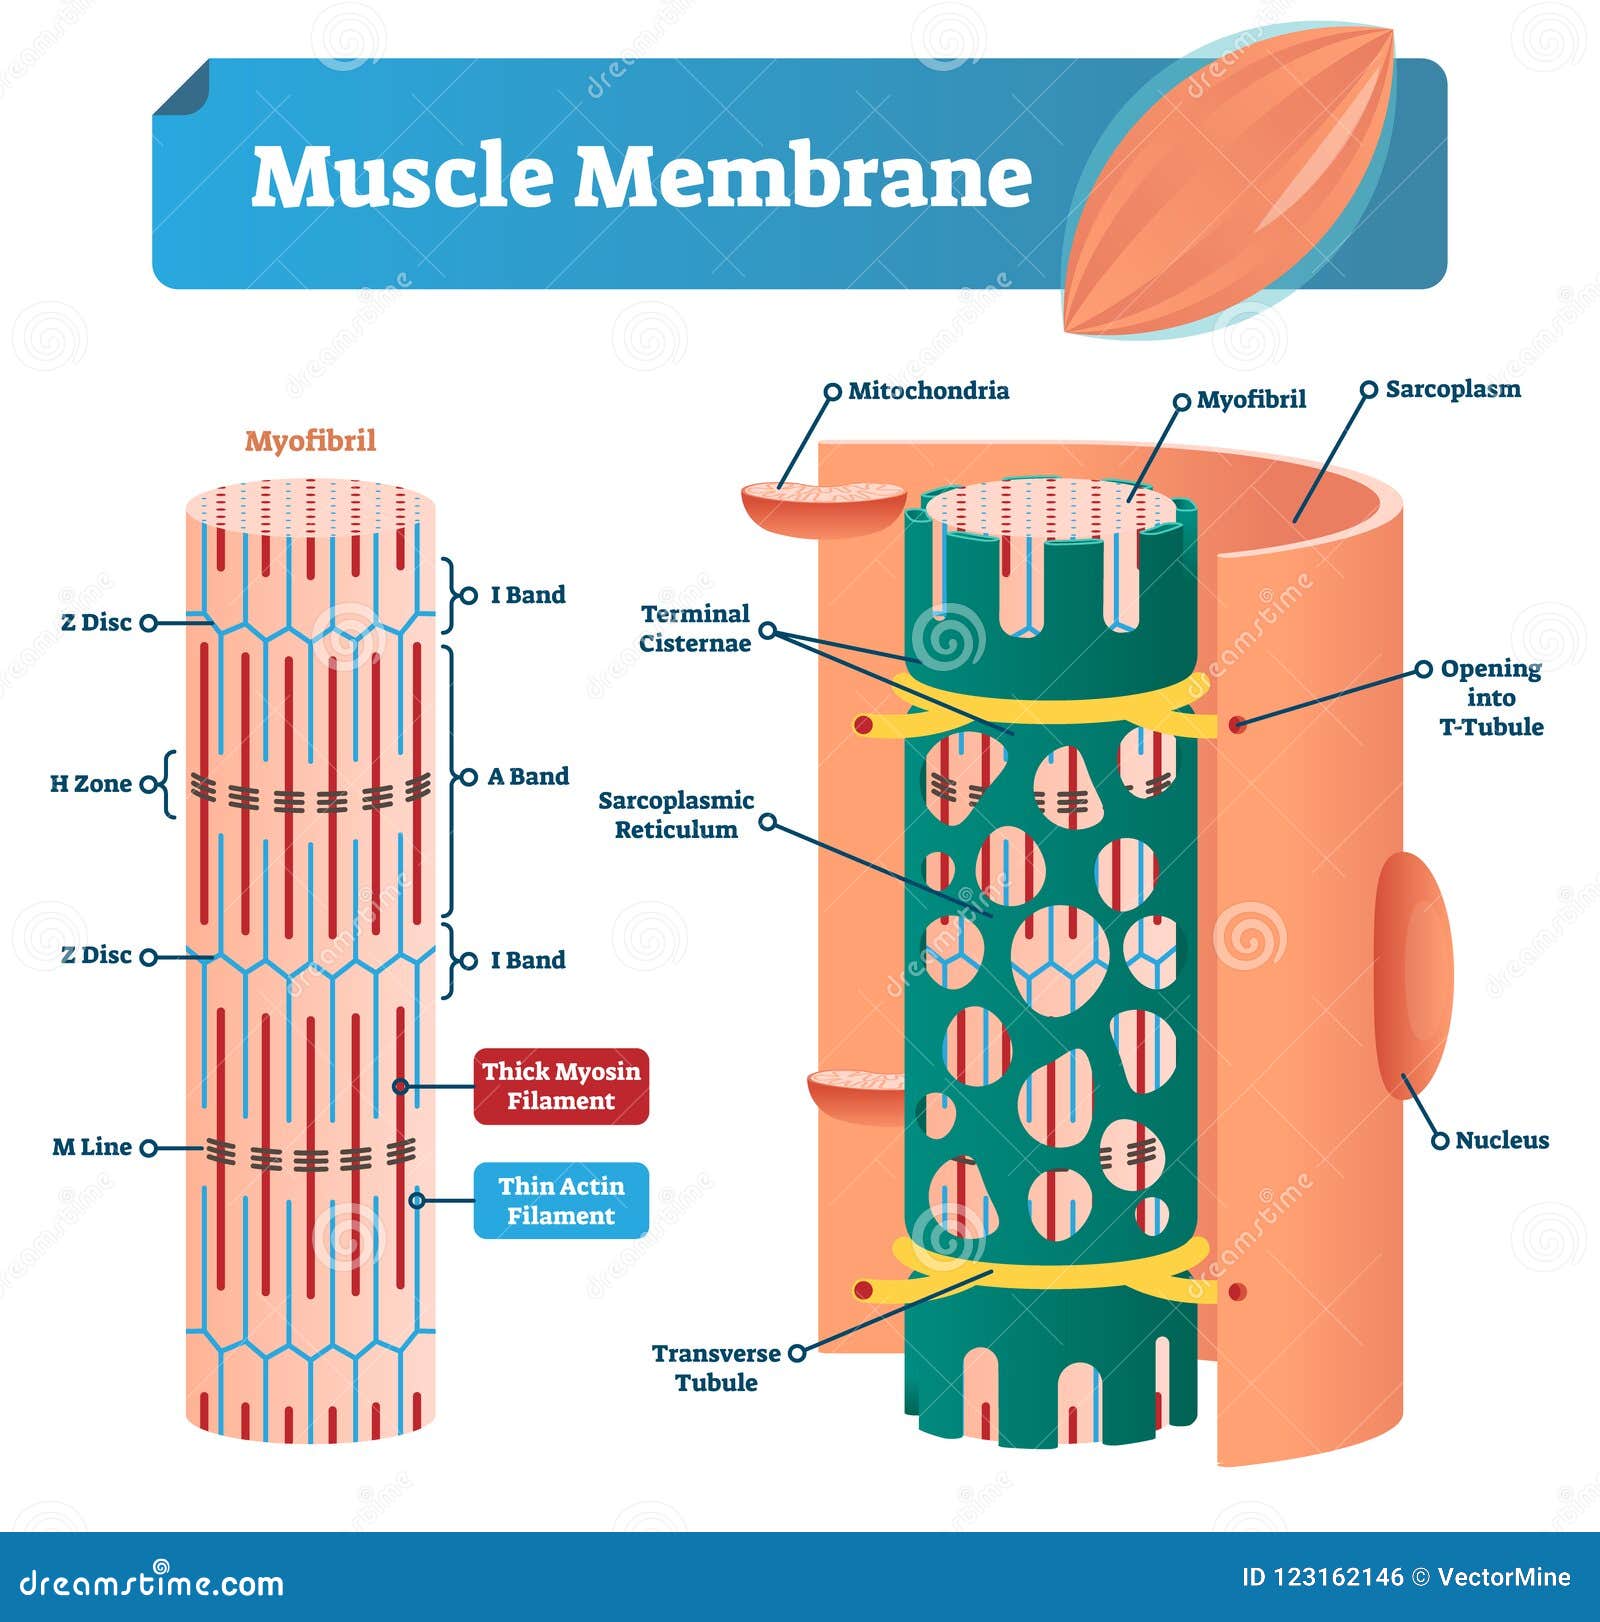 muscle membrane  . labeled scheme with myofibril, disc, zone, line and band. anatomical mitochondria diagram.